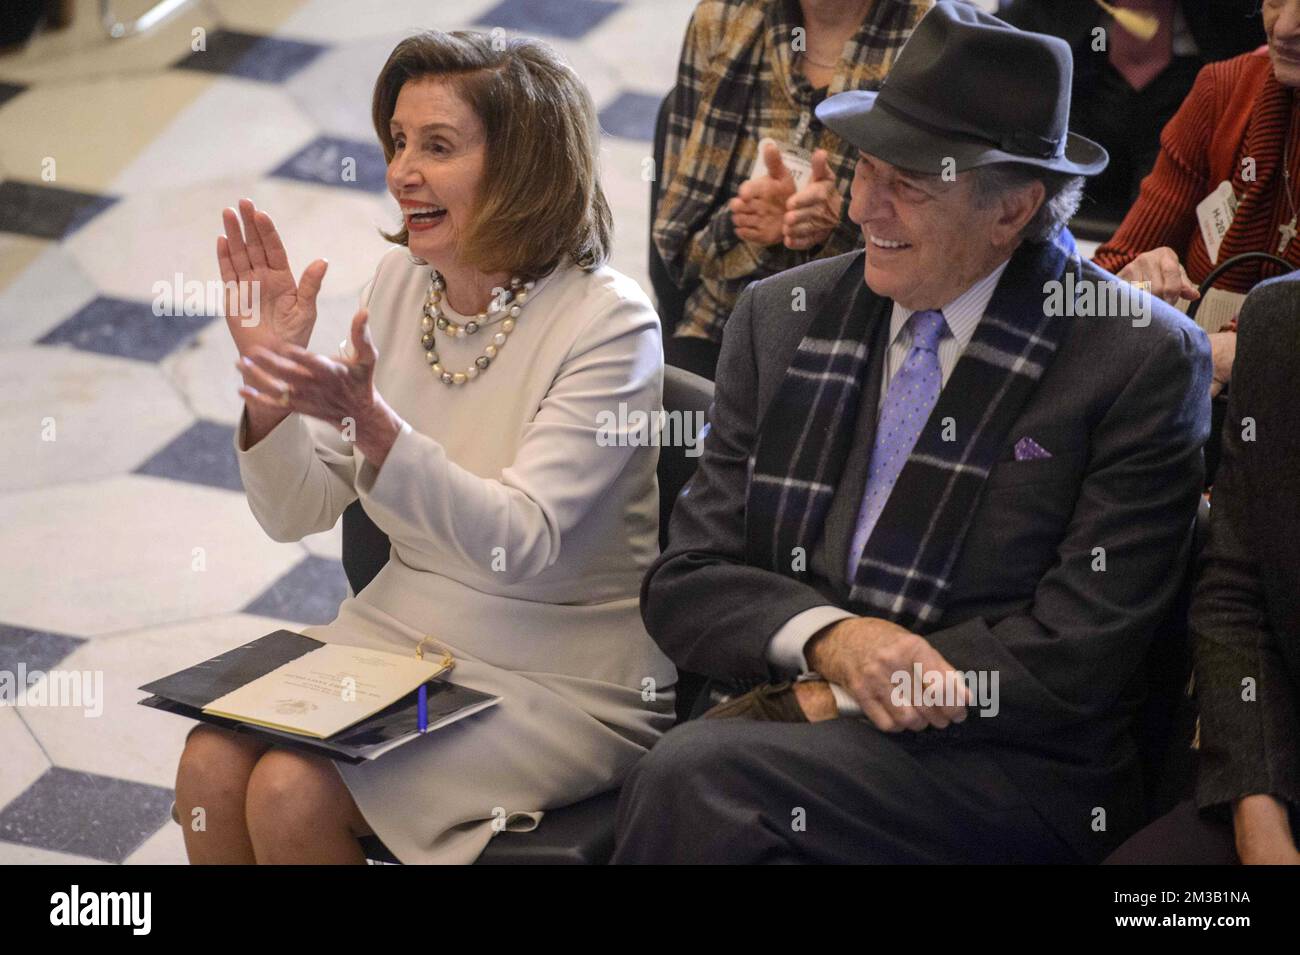 Washington, United States. 14th Dec, 2022. Speaker of the House Nancy Pelosi, D-CA, and her husband, Paul Pelosi, laugh during her portrait unveiling ceremony in Statuary Hall at the U.S. Capitol in Washington, DC on Wednesday, December 14, 2022. Pelosi is the first female speaker of the house. Photo by Bonnie Cash/UPI Credit: UPI/Alamy Live News Stock Photo